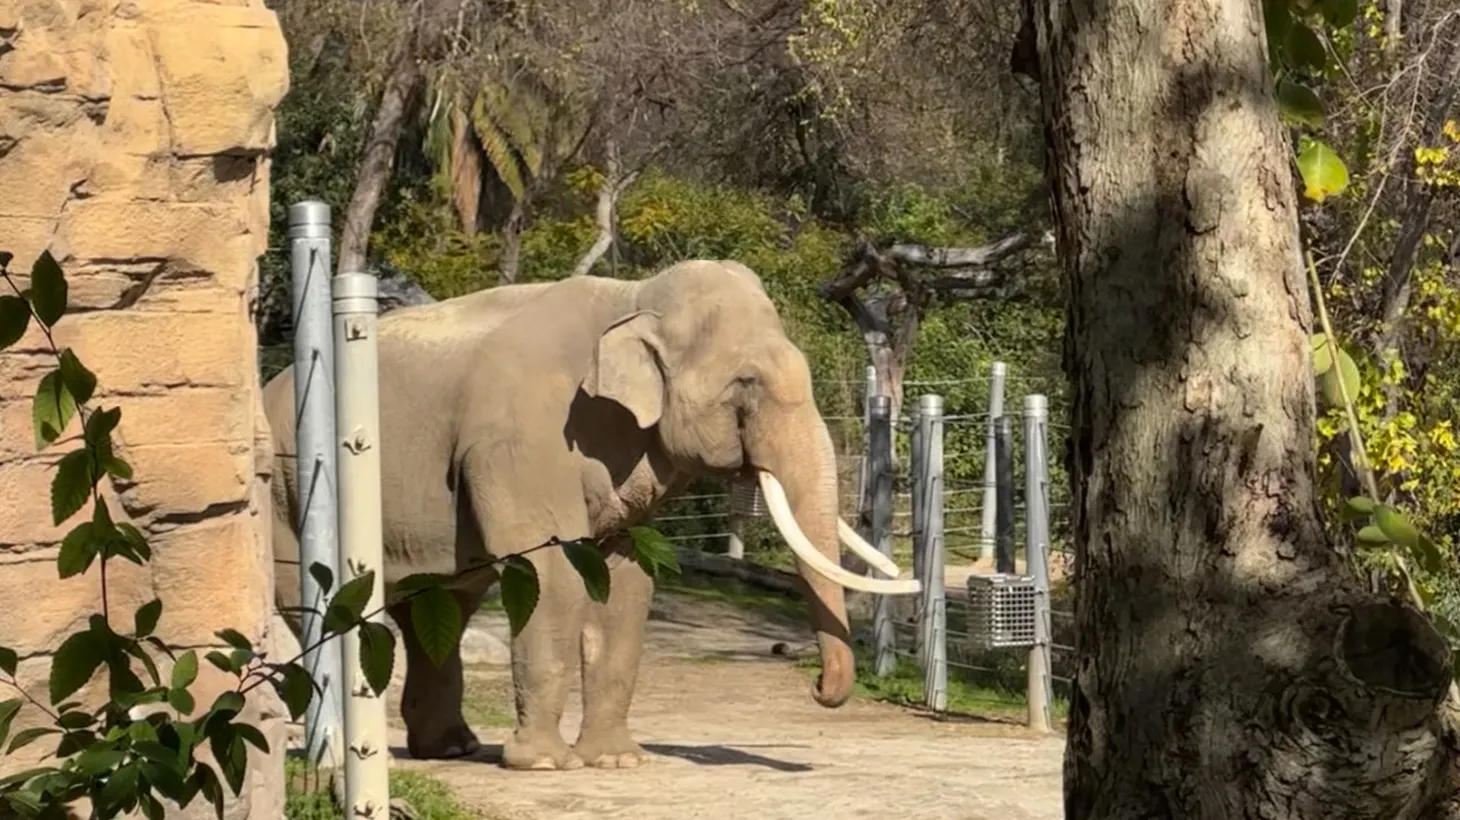 One of two surviving elephants at the LA Zoo stands in its habitat.